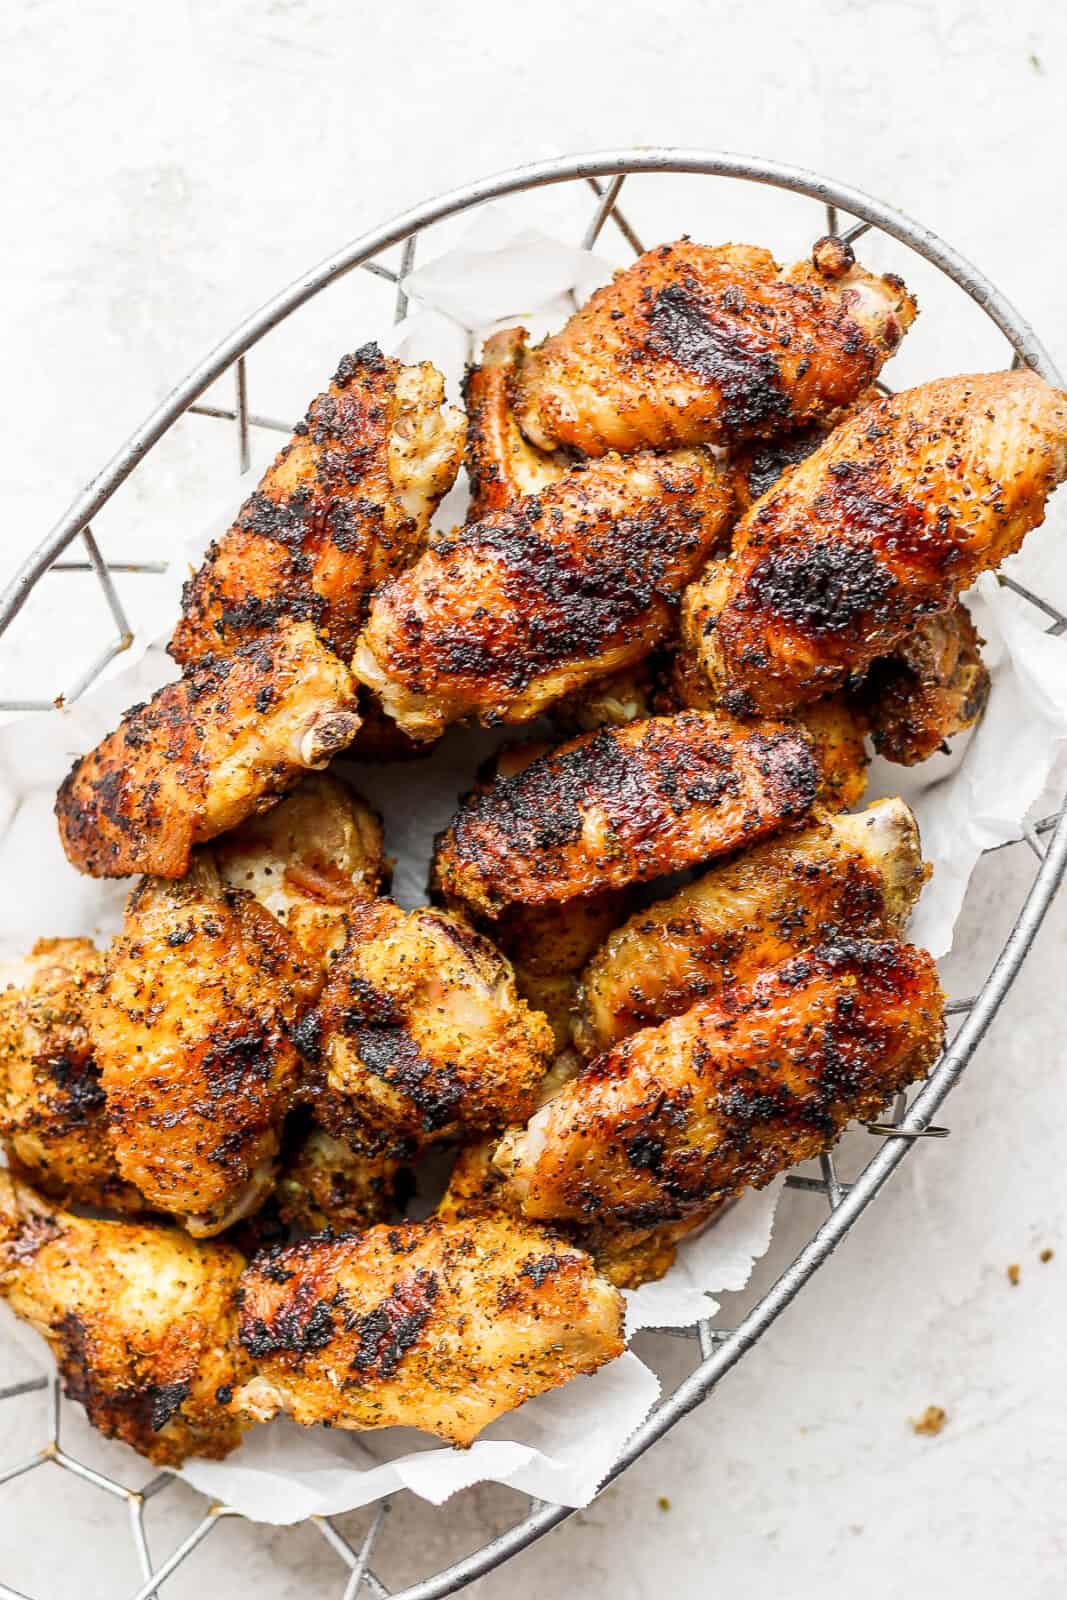 Basket of grilled chicken wings. 